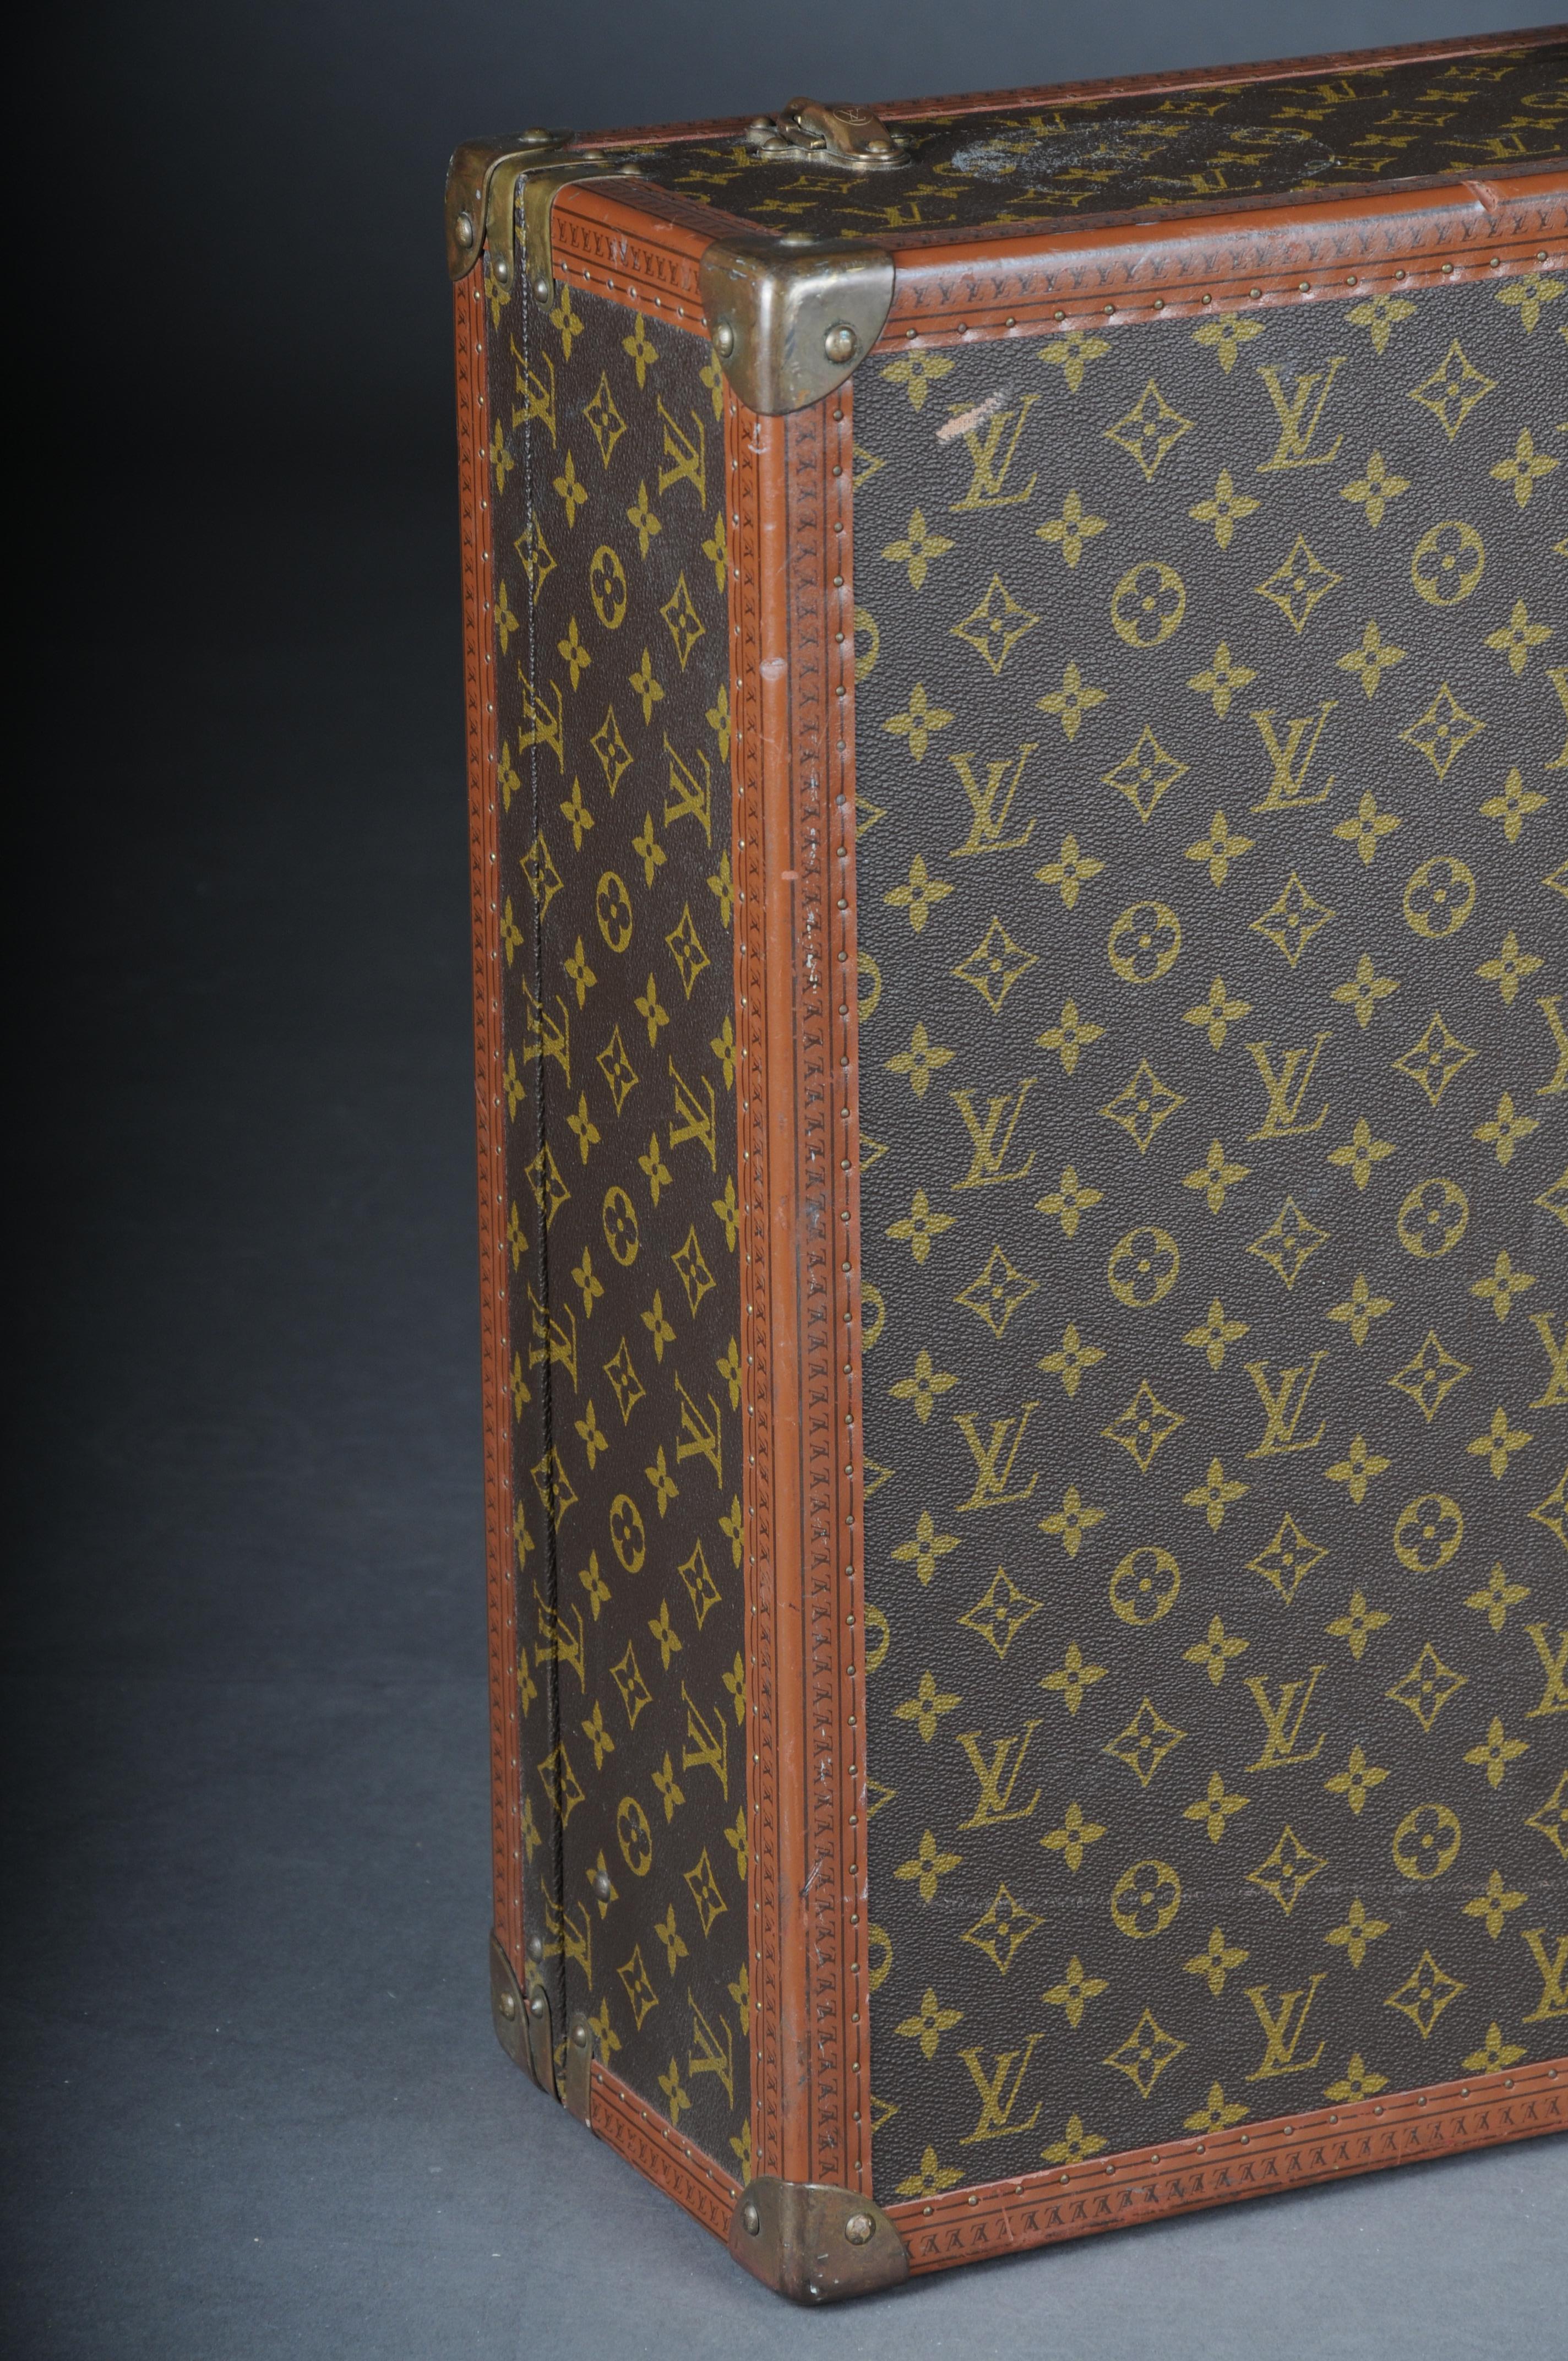 Louis Vuitton travel case/overseas case/suitcase, LV monogram, Trunk
(hard case)

This beautiful trunk (hard case) Louis Vuitton is in monogram canvas. This is the model Alzer. The hardware is gold metal. The lining is canvas. The rounded handle